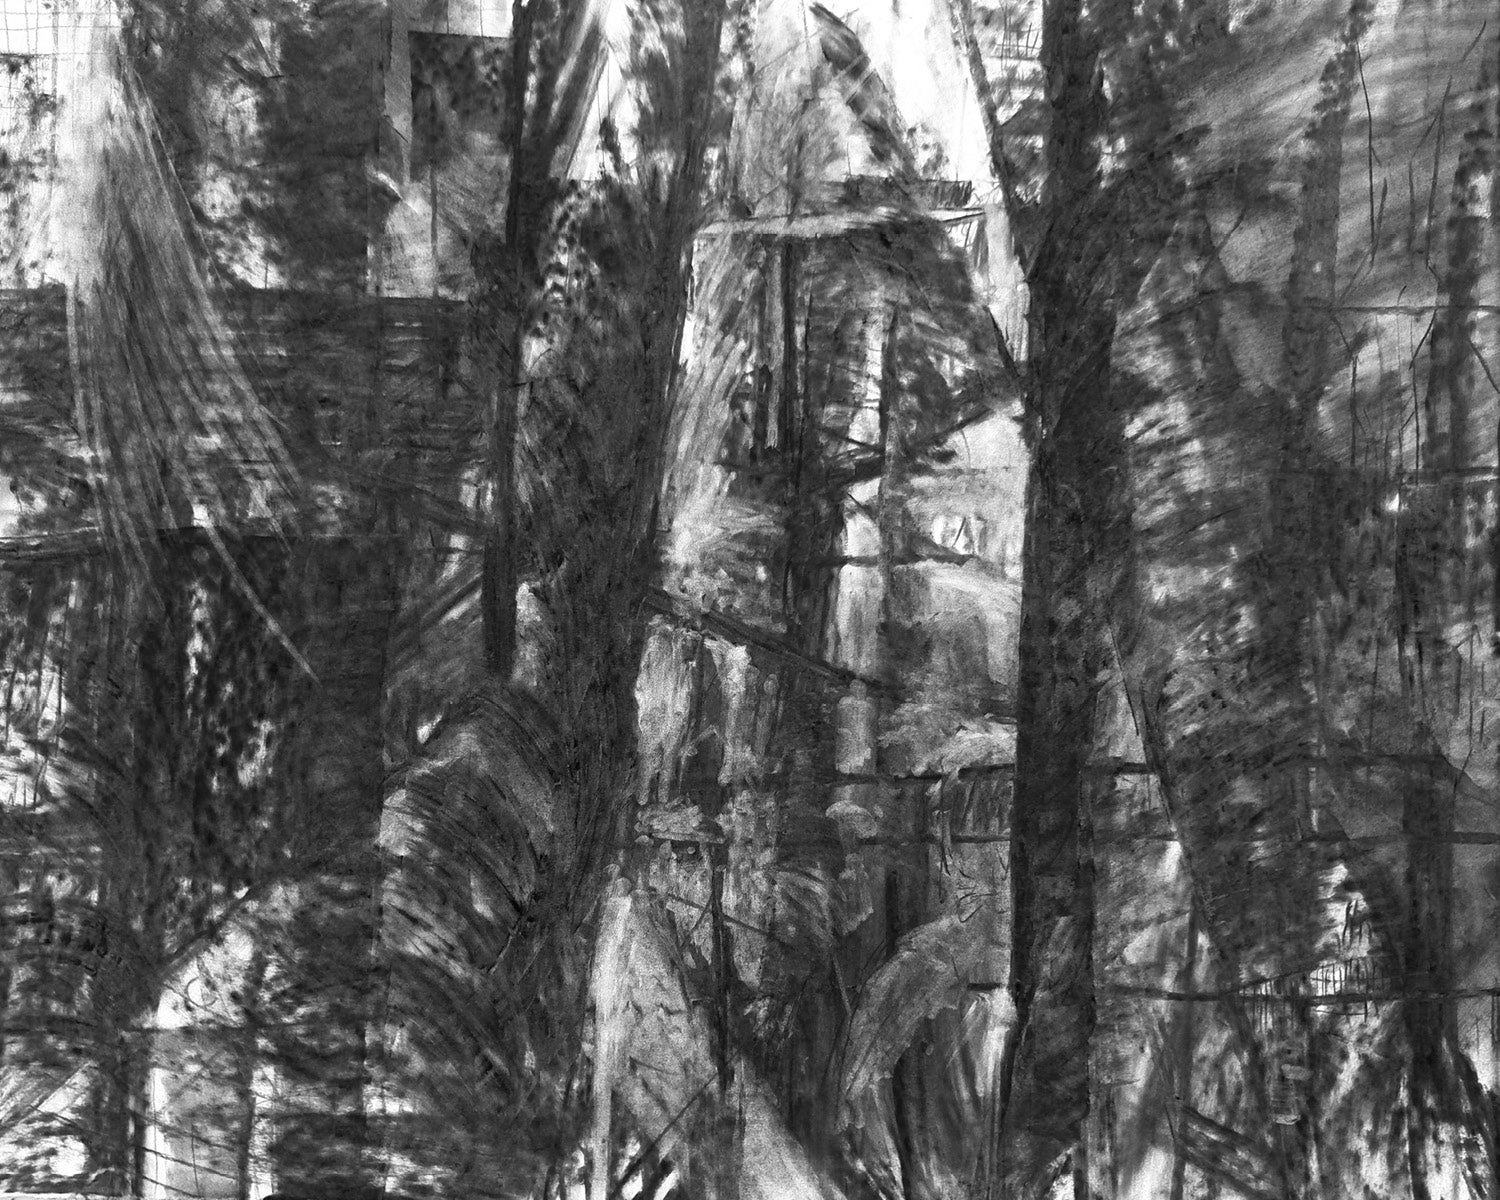 Impressionistic conte or charcoal drawing